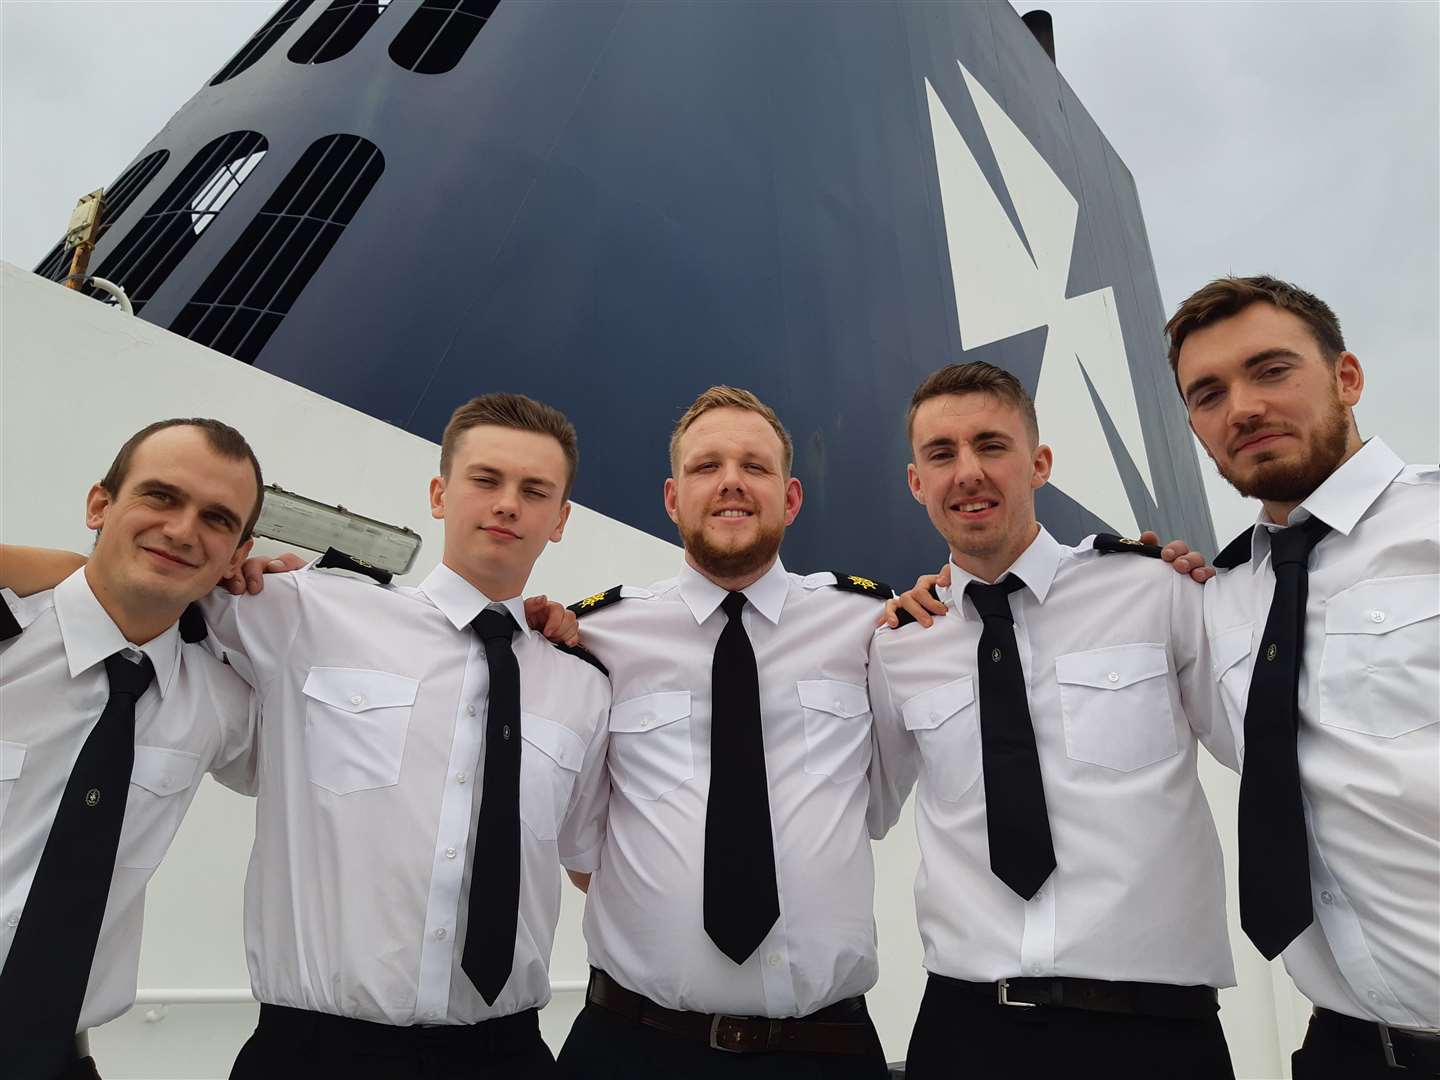 The newly qualified apprentices. From left, Jack Wilmshurst, Oliver Williams, Thomas Dignan, Sean Knight and Gary Steer